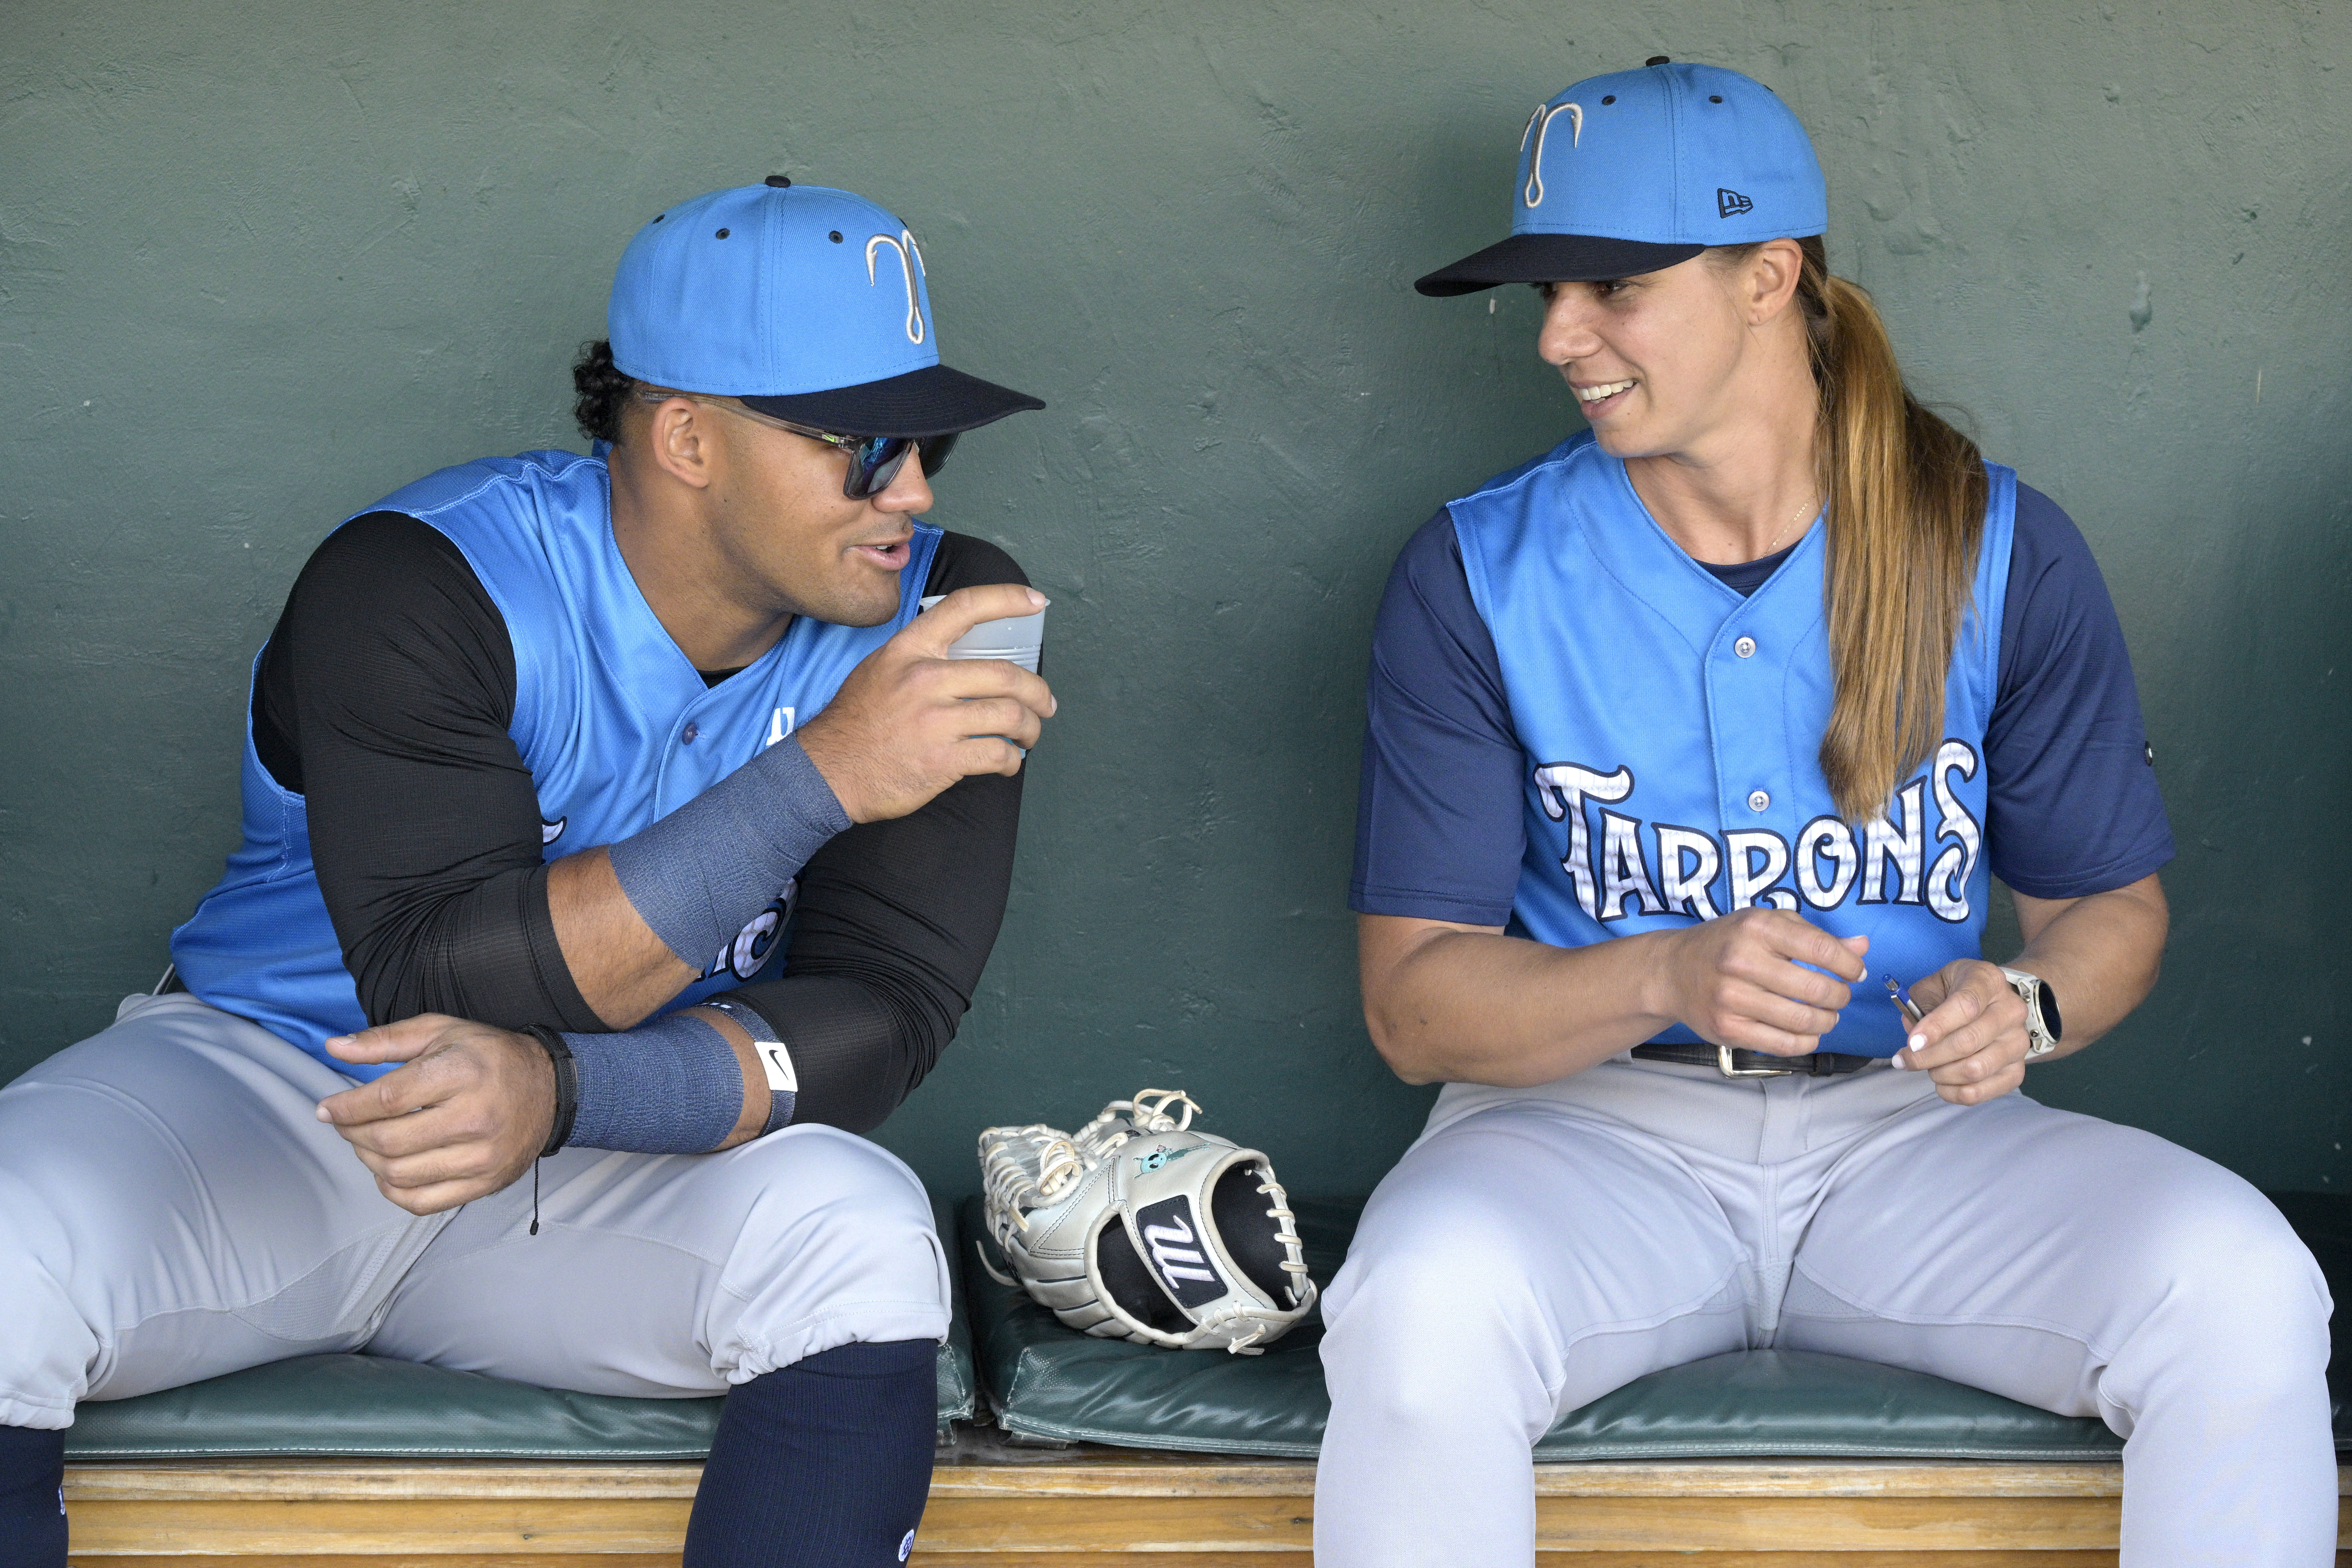 Fans cheer as first female manager in the minors, Rachel Balkovec, leads  Tarpons to win in debut